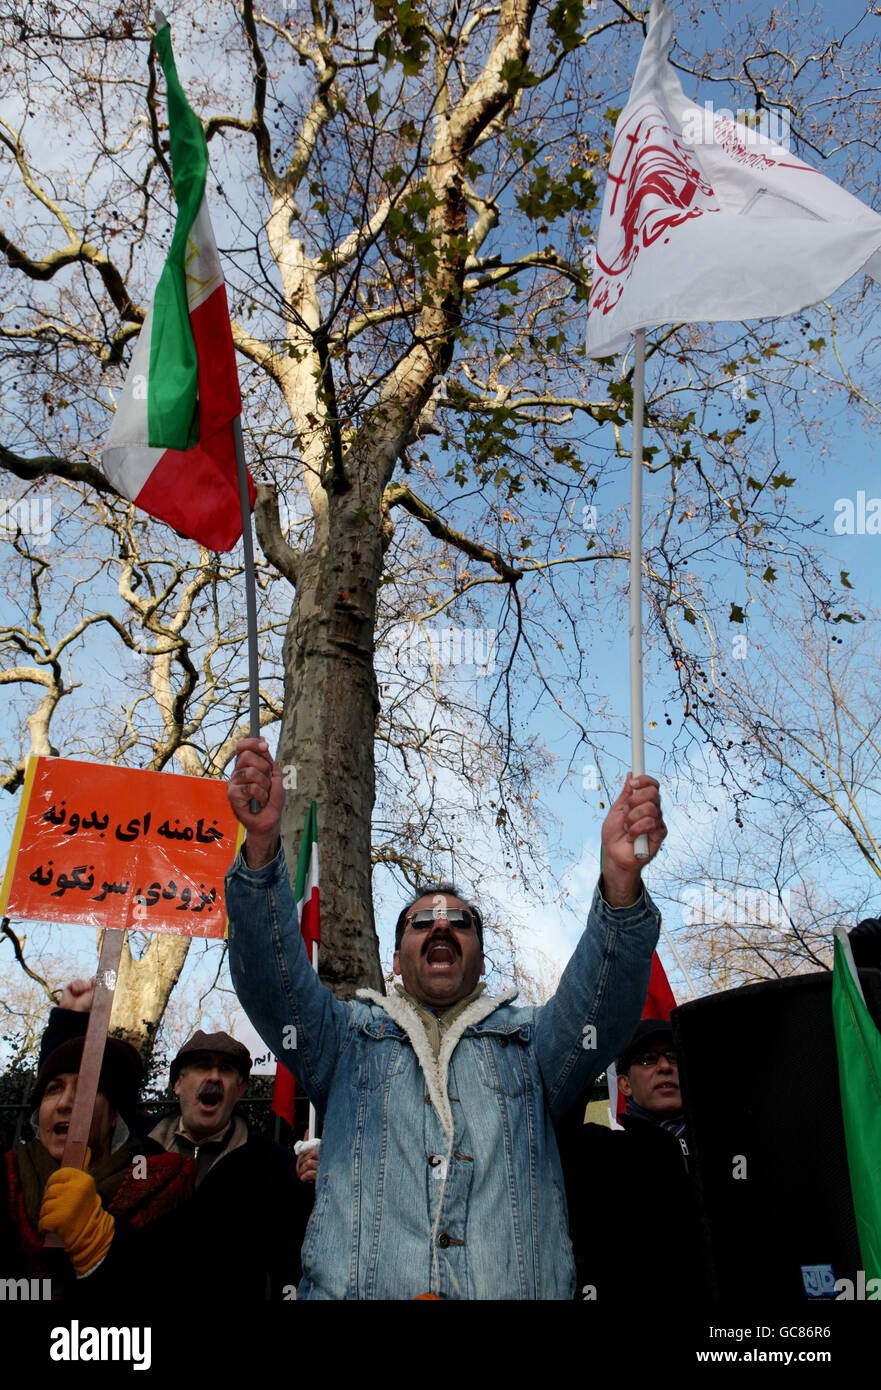 Supporters of People's Mojahedin Organisation of Iran (PMOI) rally outside Iranian embassy in London in support of the Iranian people's protests and demands for regime change in Iran. Stock Photo